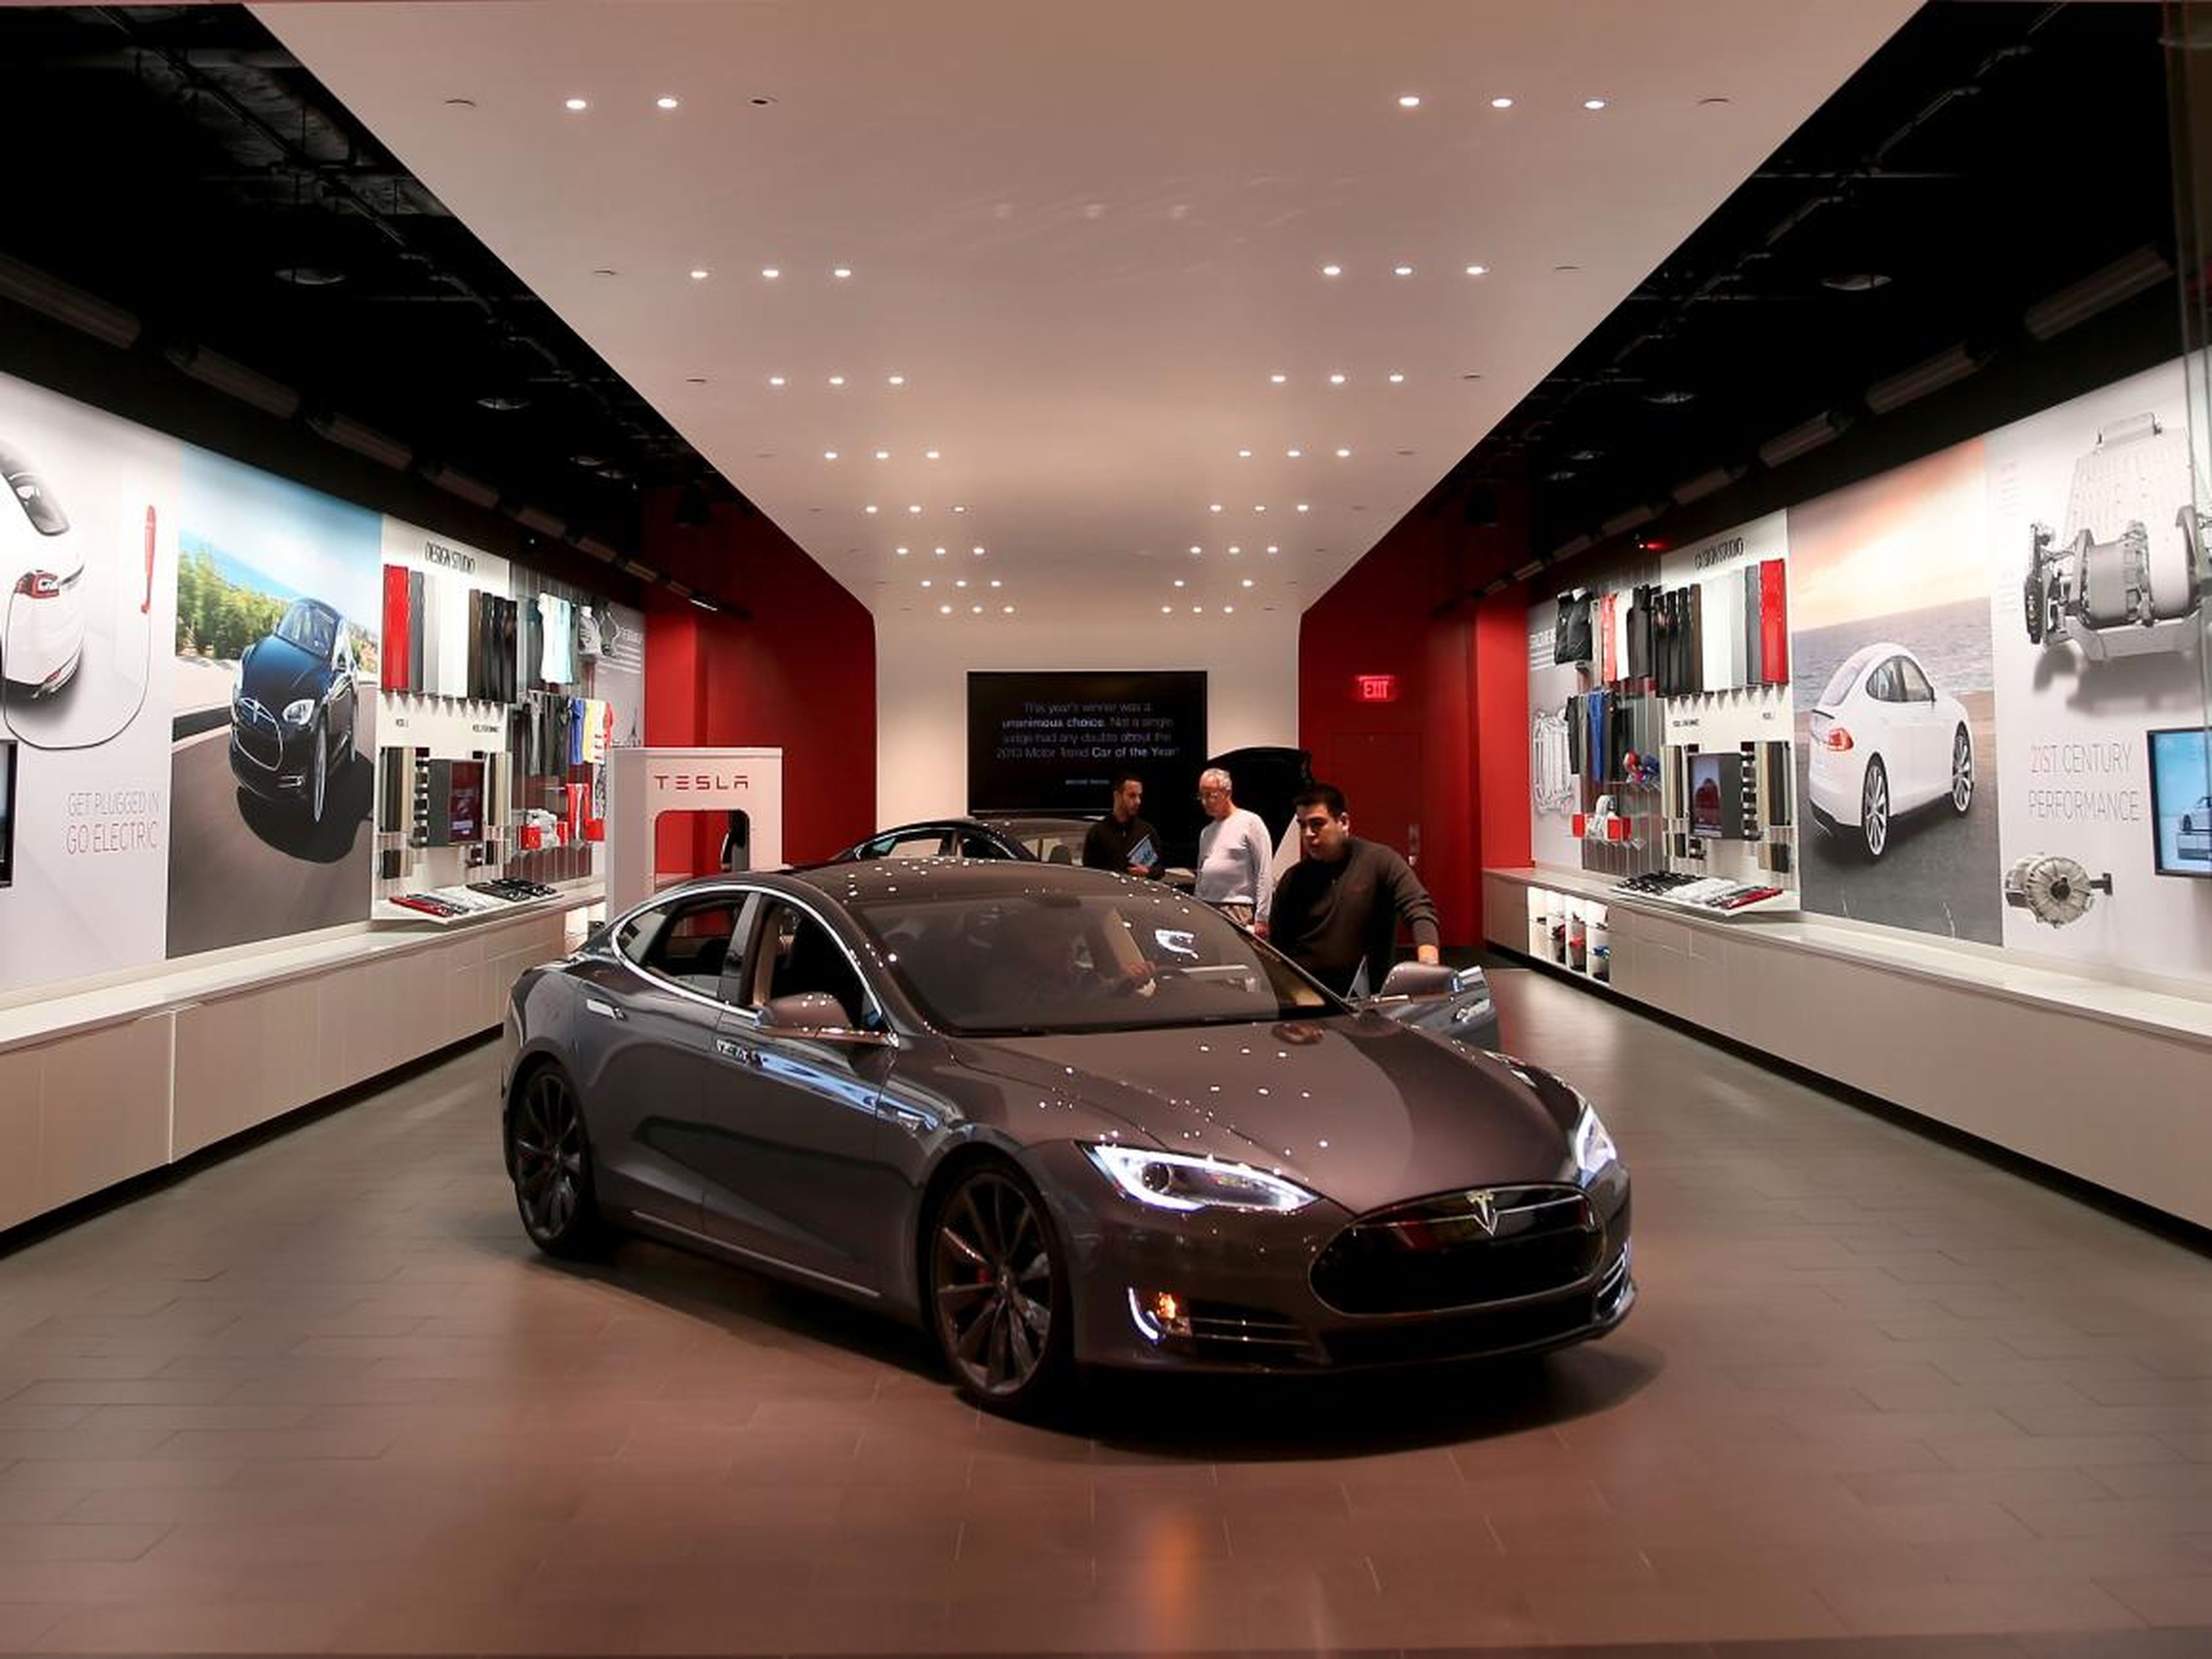 Today, Tesla "stores" have nearly no cars on-lot. Instead, prospective buyers can check out sample cars and order online or through a salesperson for later delivery, depending on the state. LaserDiscs, however, are not part of the